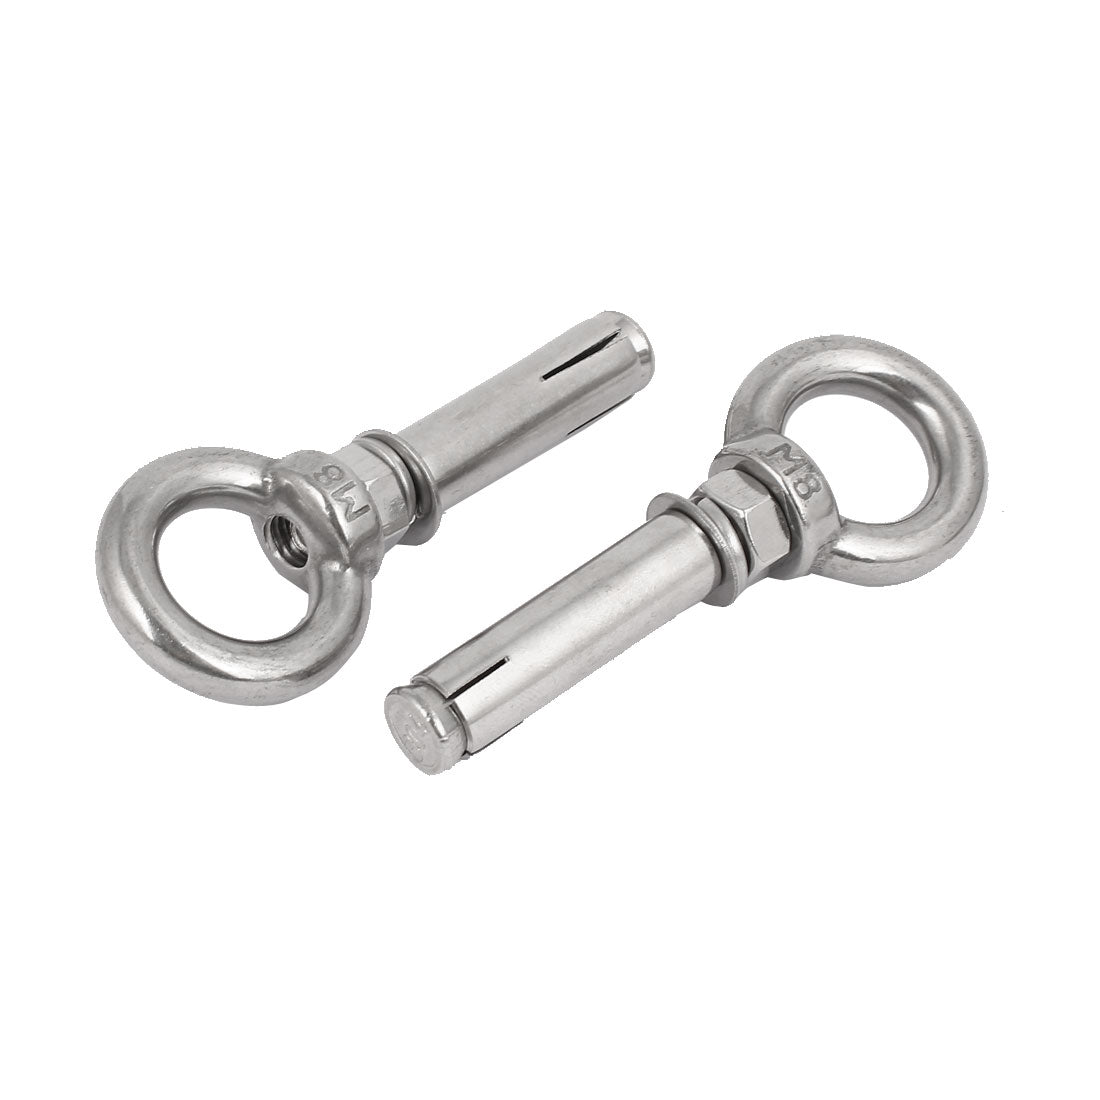 uxcell Uxcell M8x60mm Wall 304 Stainless Steel Expansion Screws Closed Hook Shield Bolts 2pcs